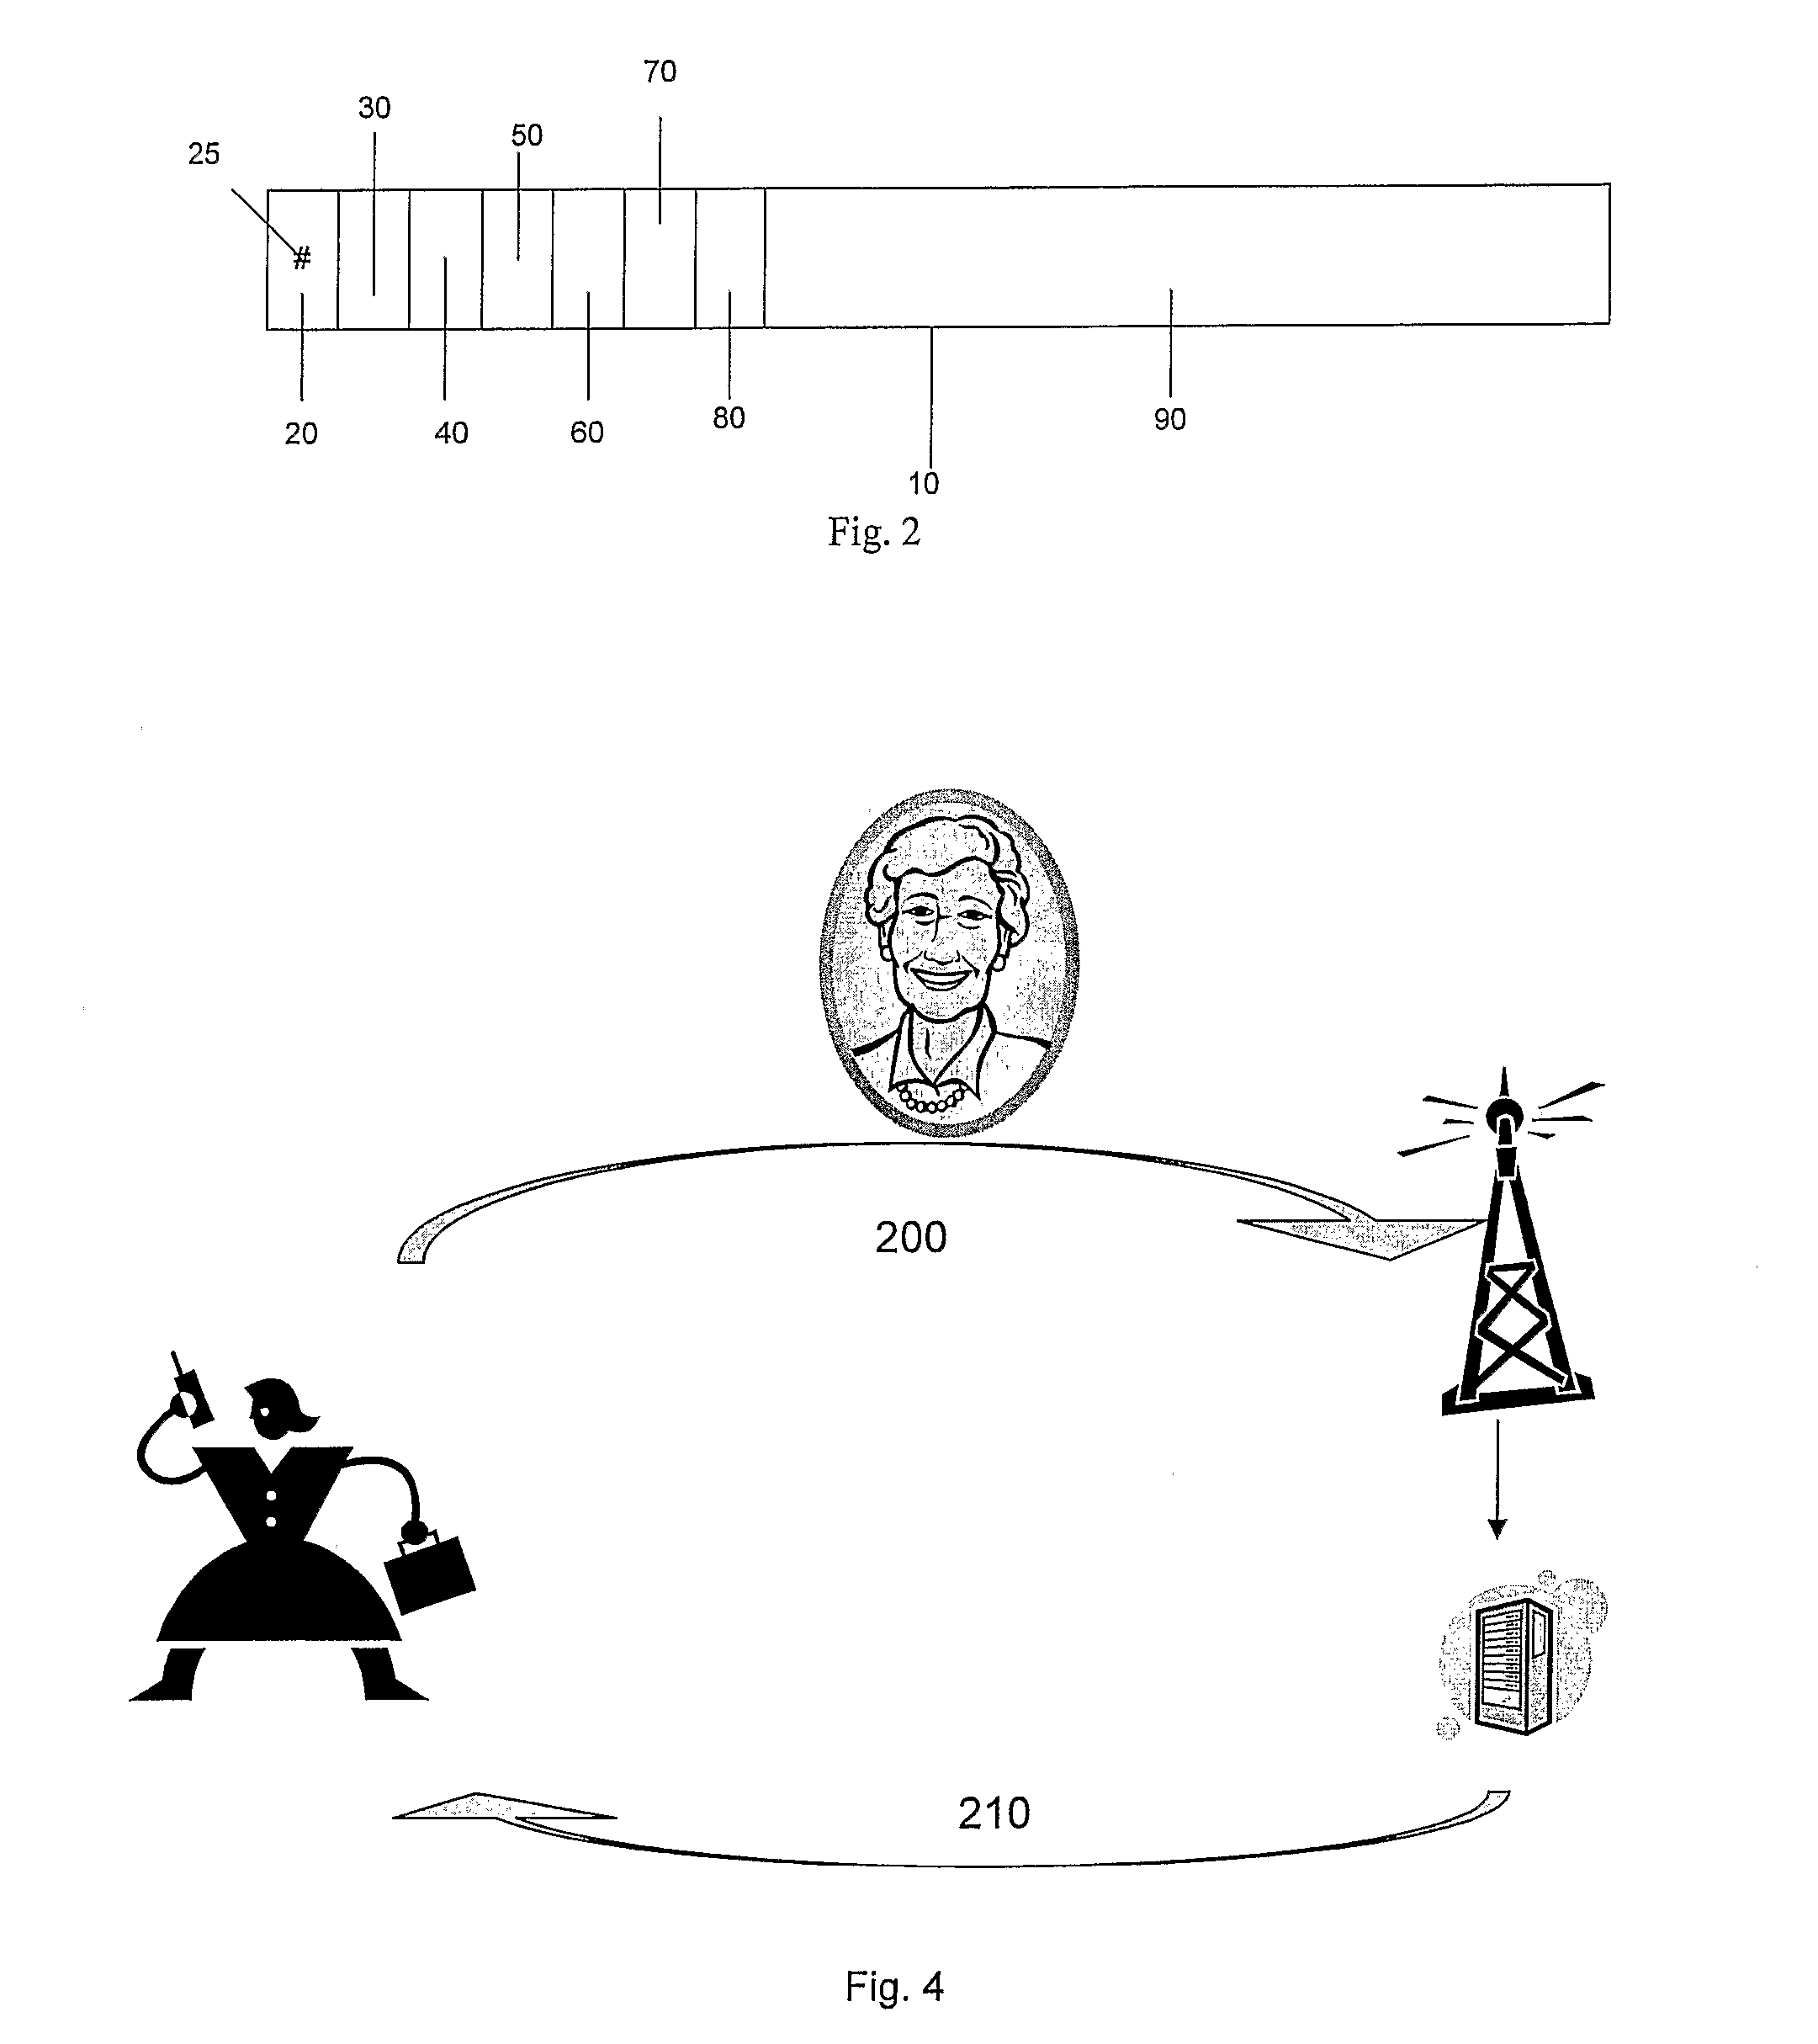 Method and system for extending the use and/or application of messaging systems